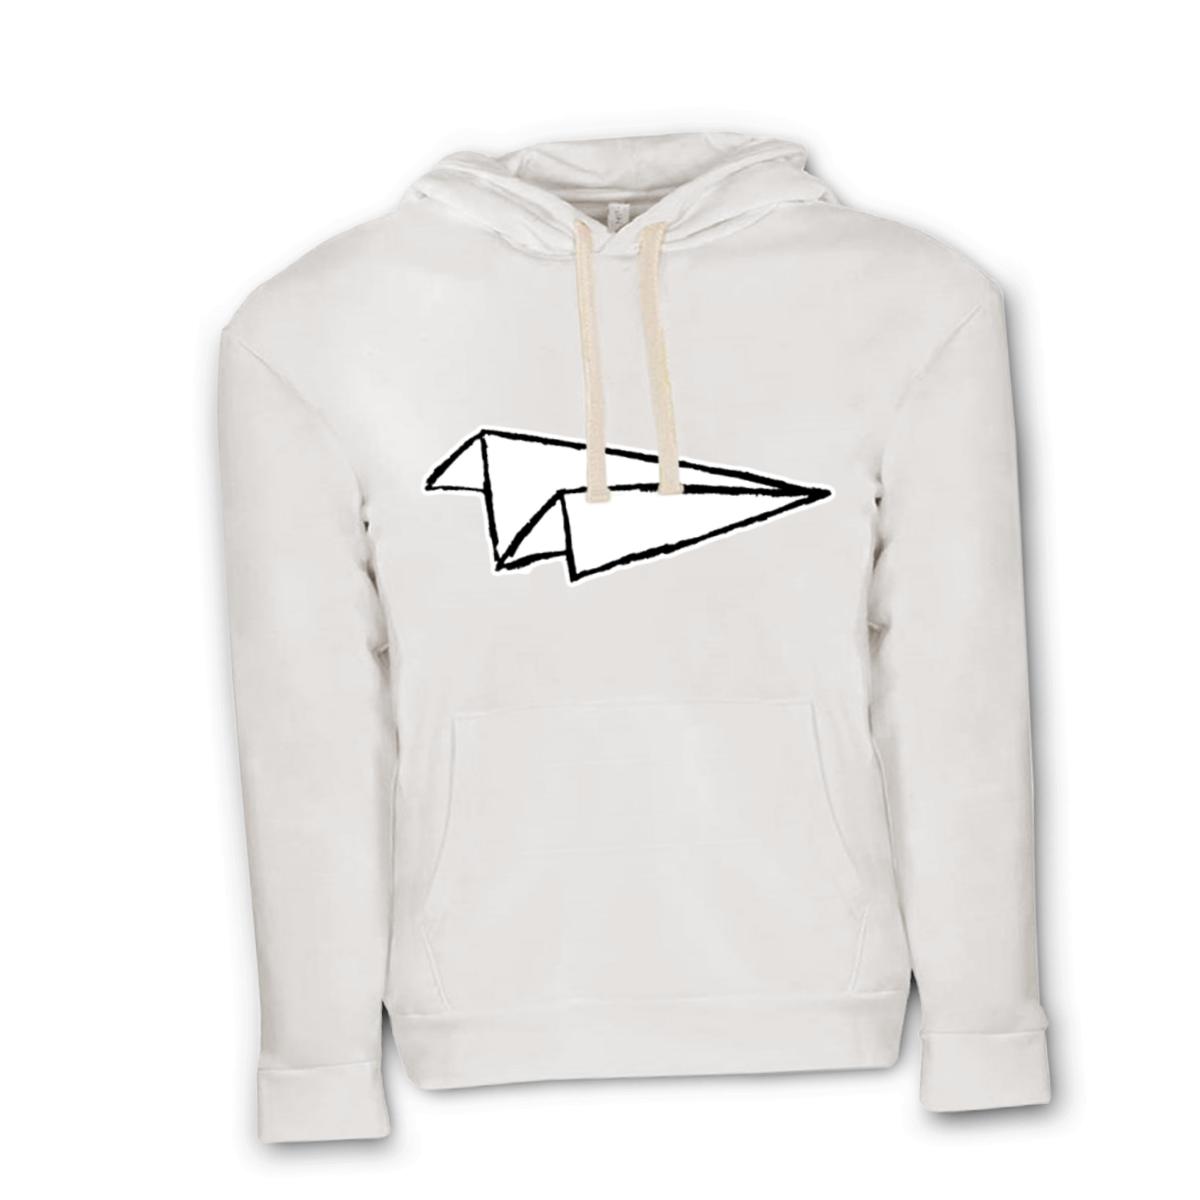 Airplane Sketch Unisex Pullover Hoodie Large white